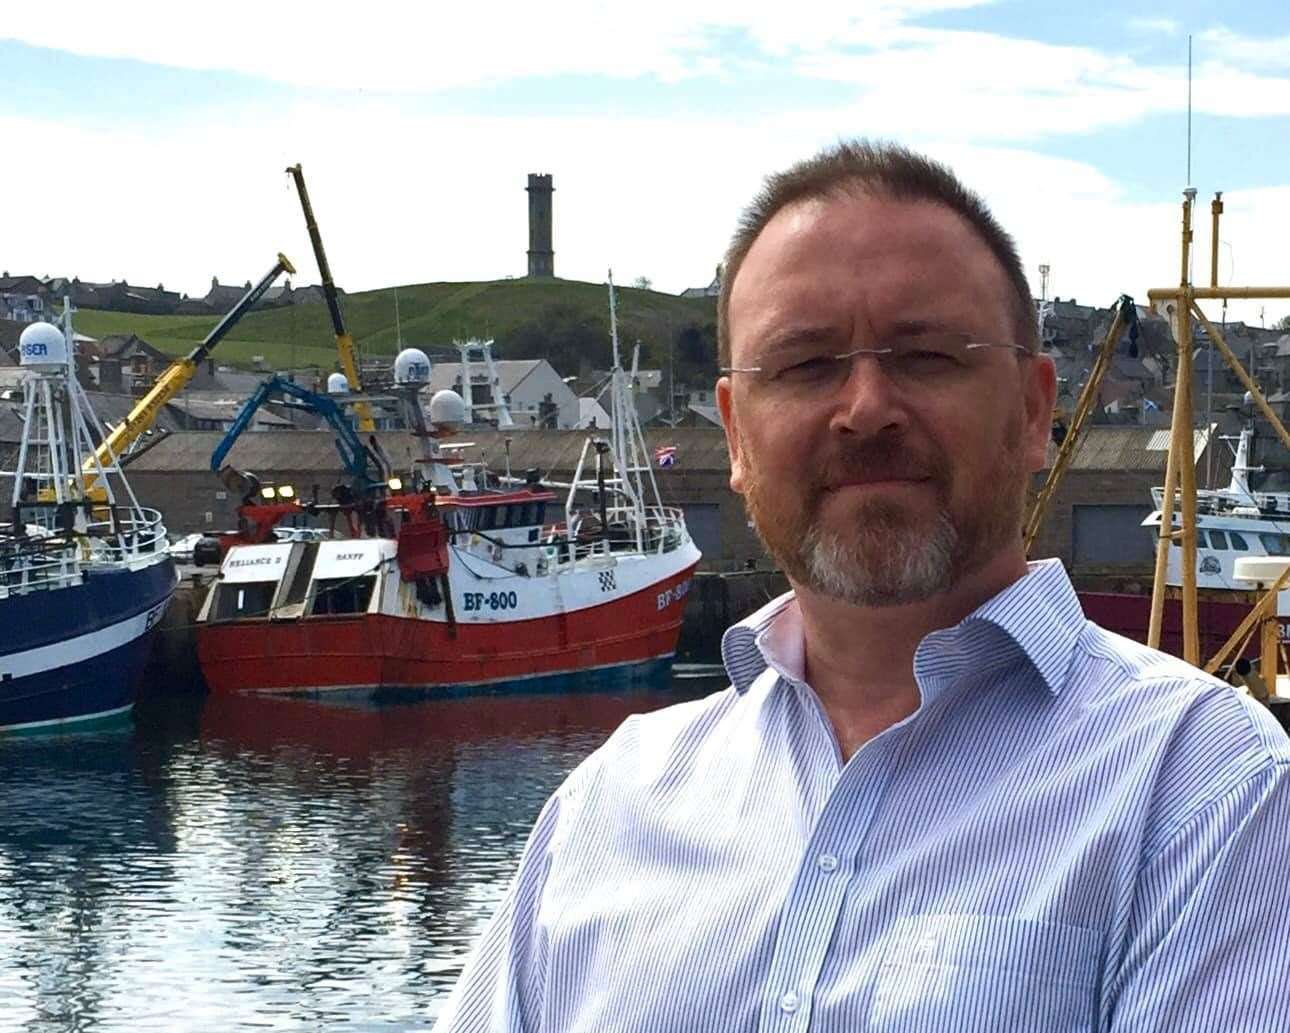 MP David Duguid had a position as a fisheries envoy.